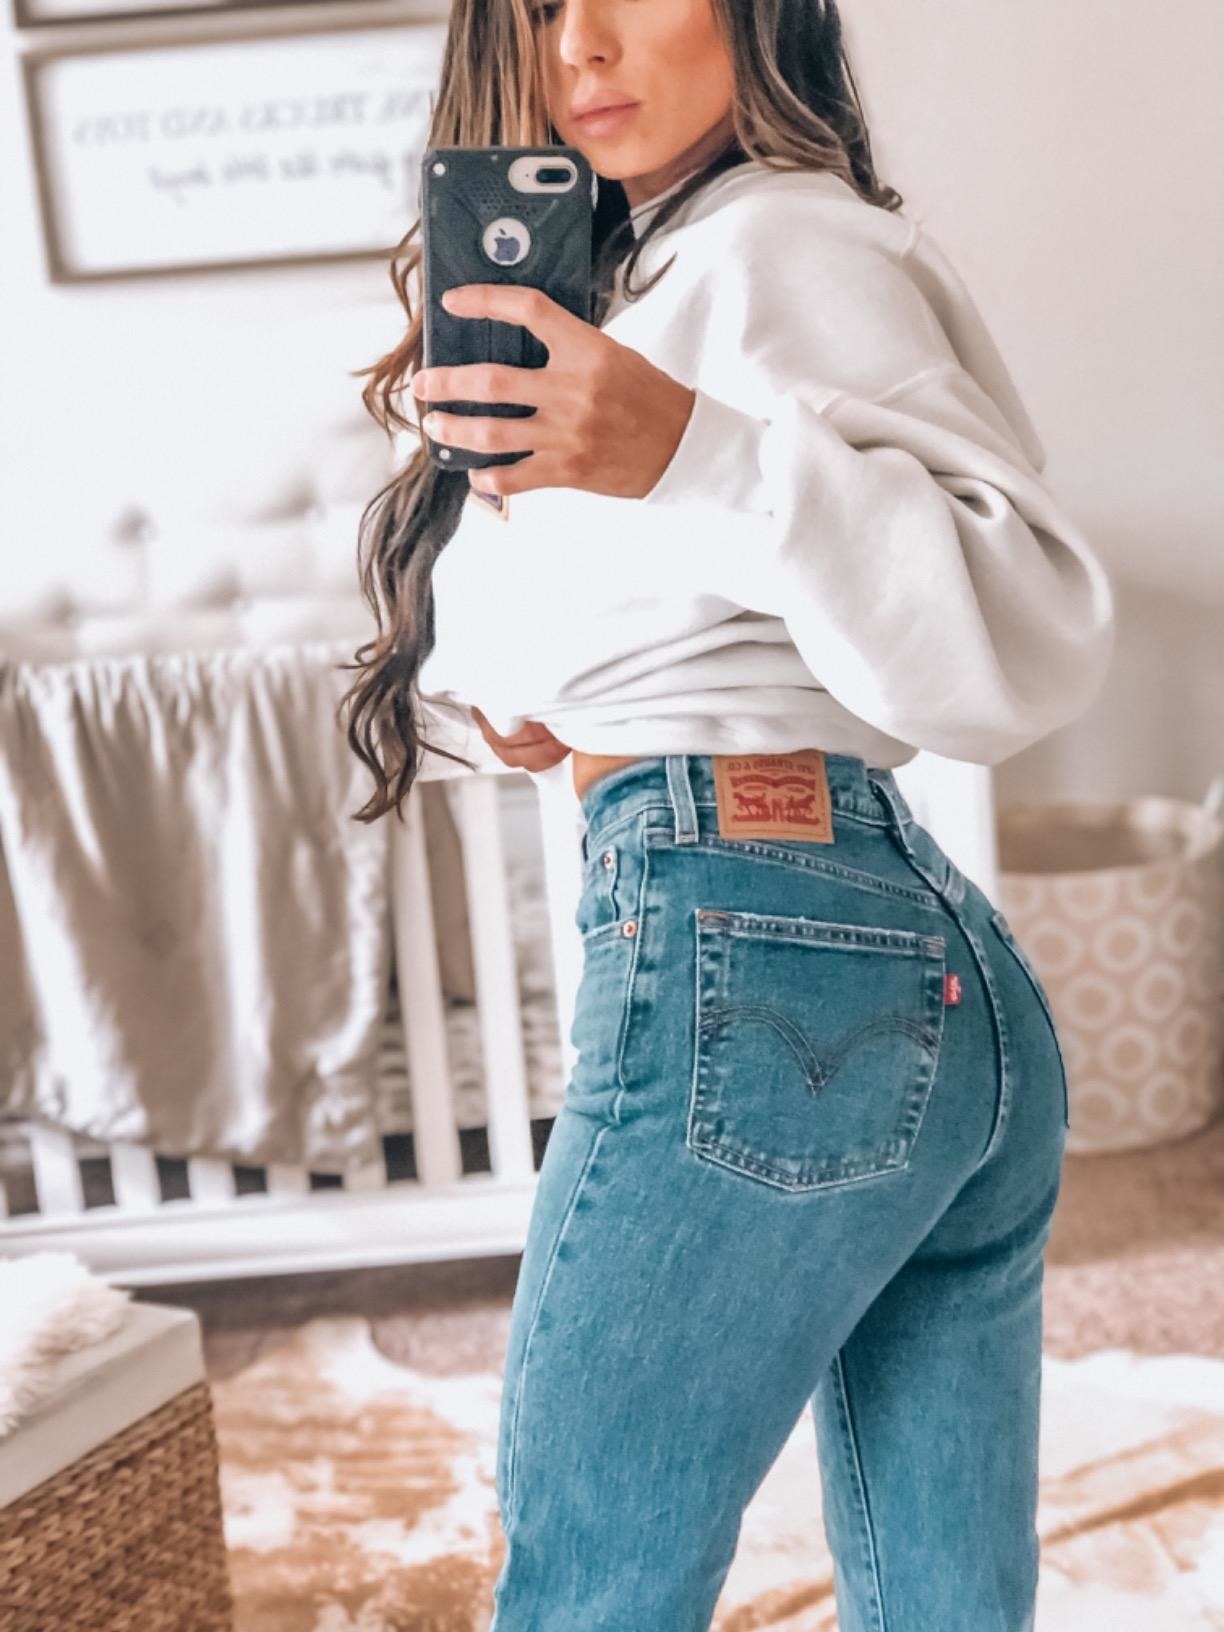 A reviewer showing the back of the jeans